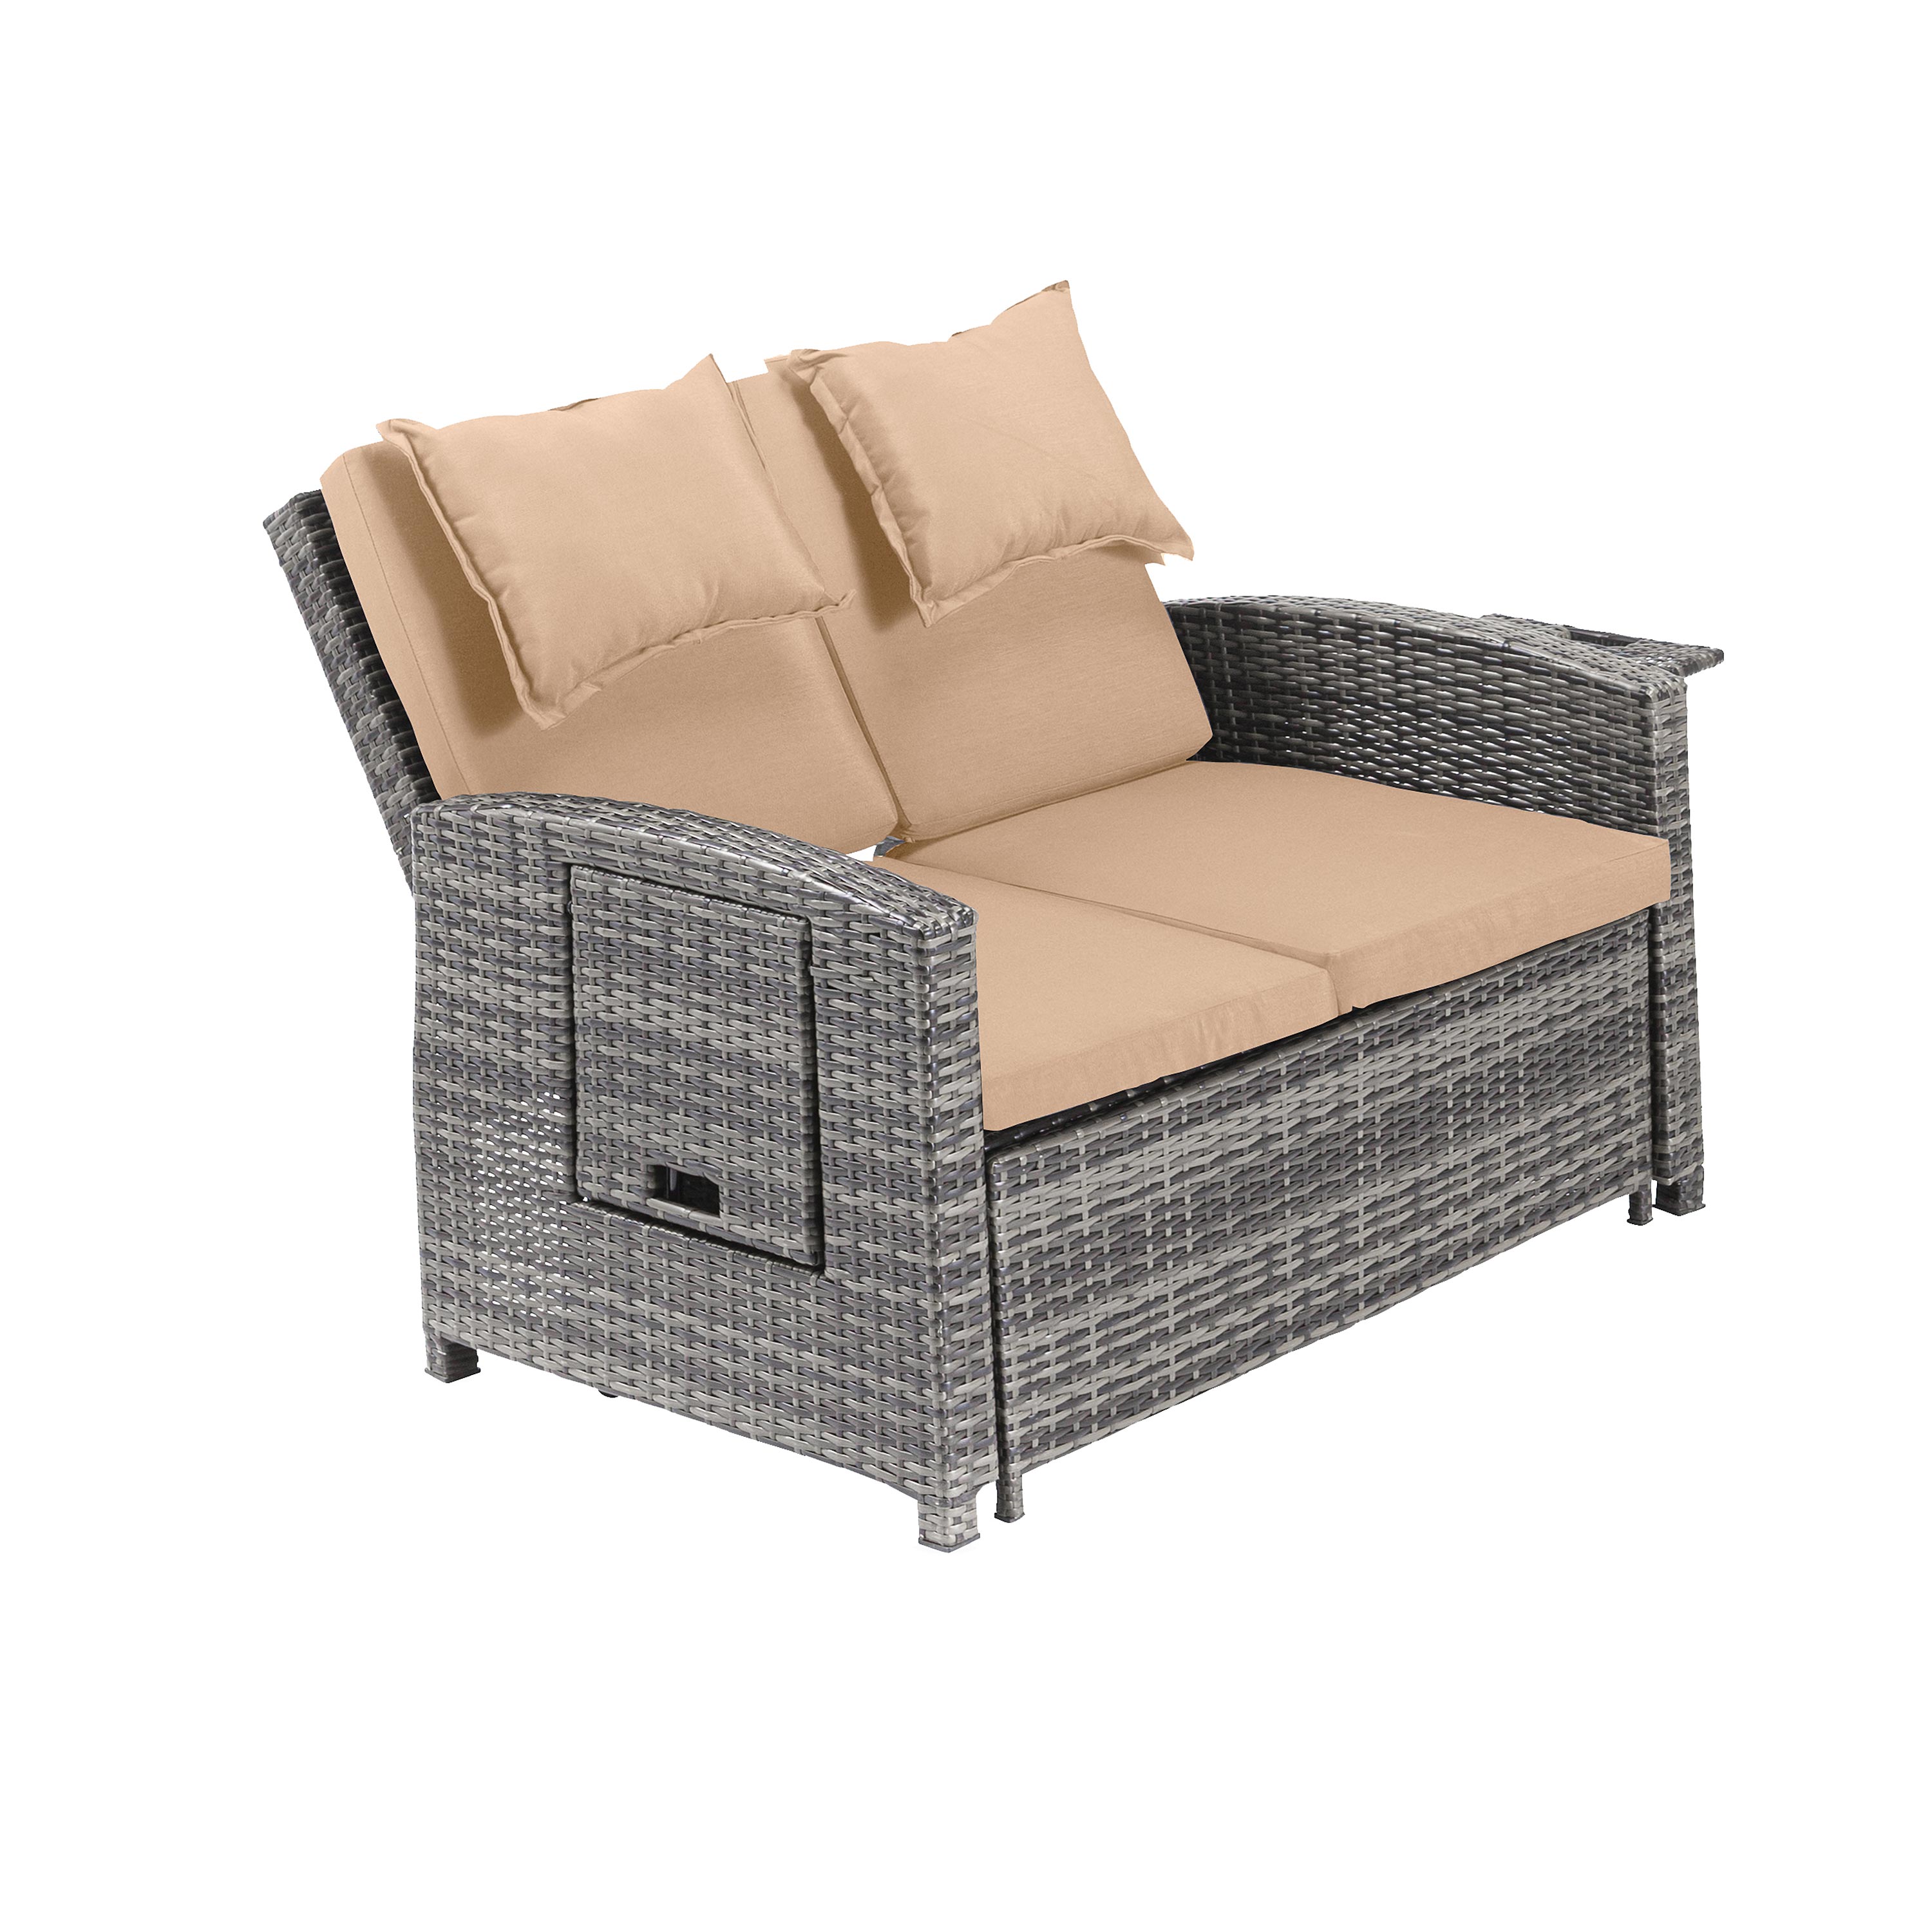 Multi-Functional Outdoor Wicker Love Seat Chaise Lounger with